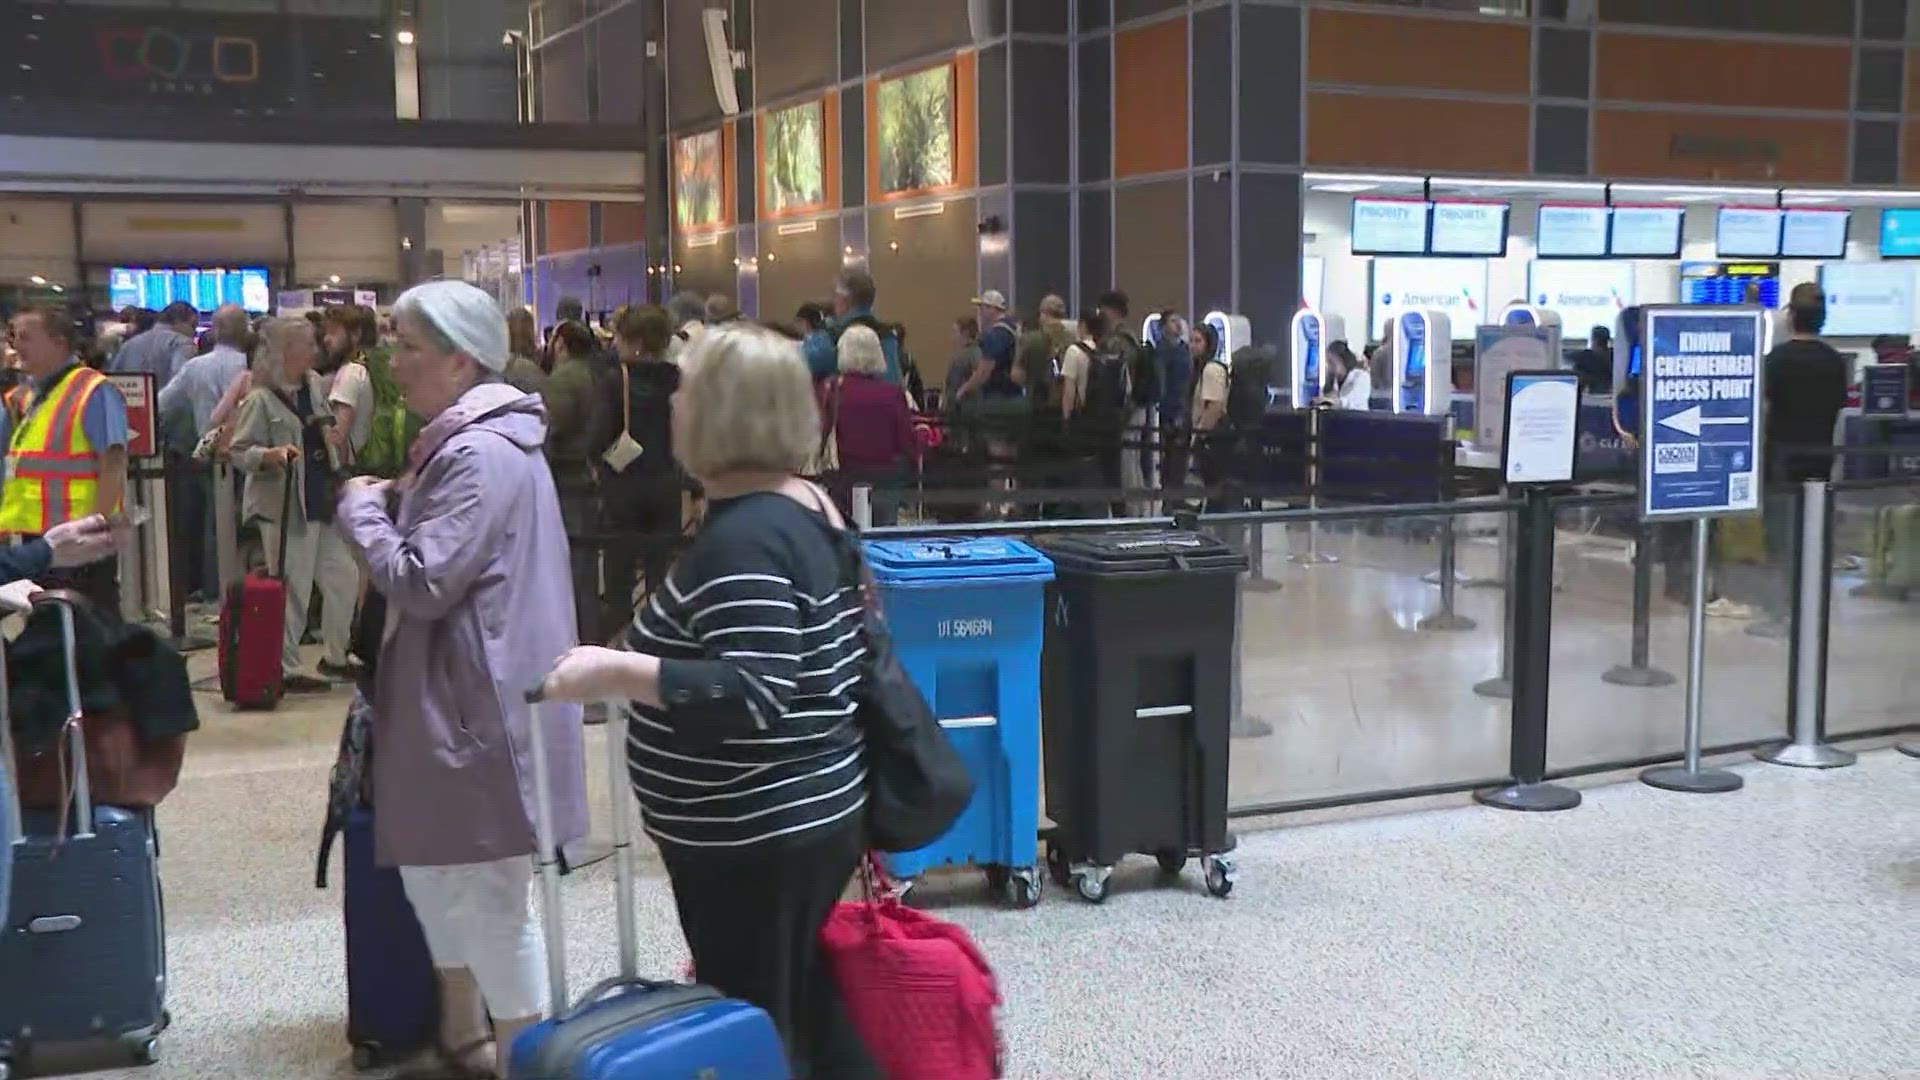 As early as 6:30 a.m., ABIA has seen an influx of flyers, and this traffic is expected to continue through Wednesday.